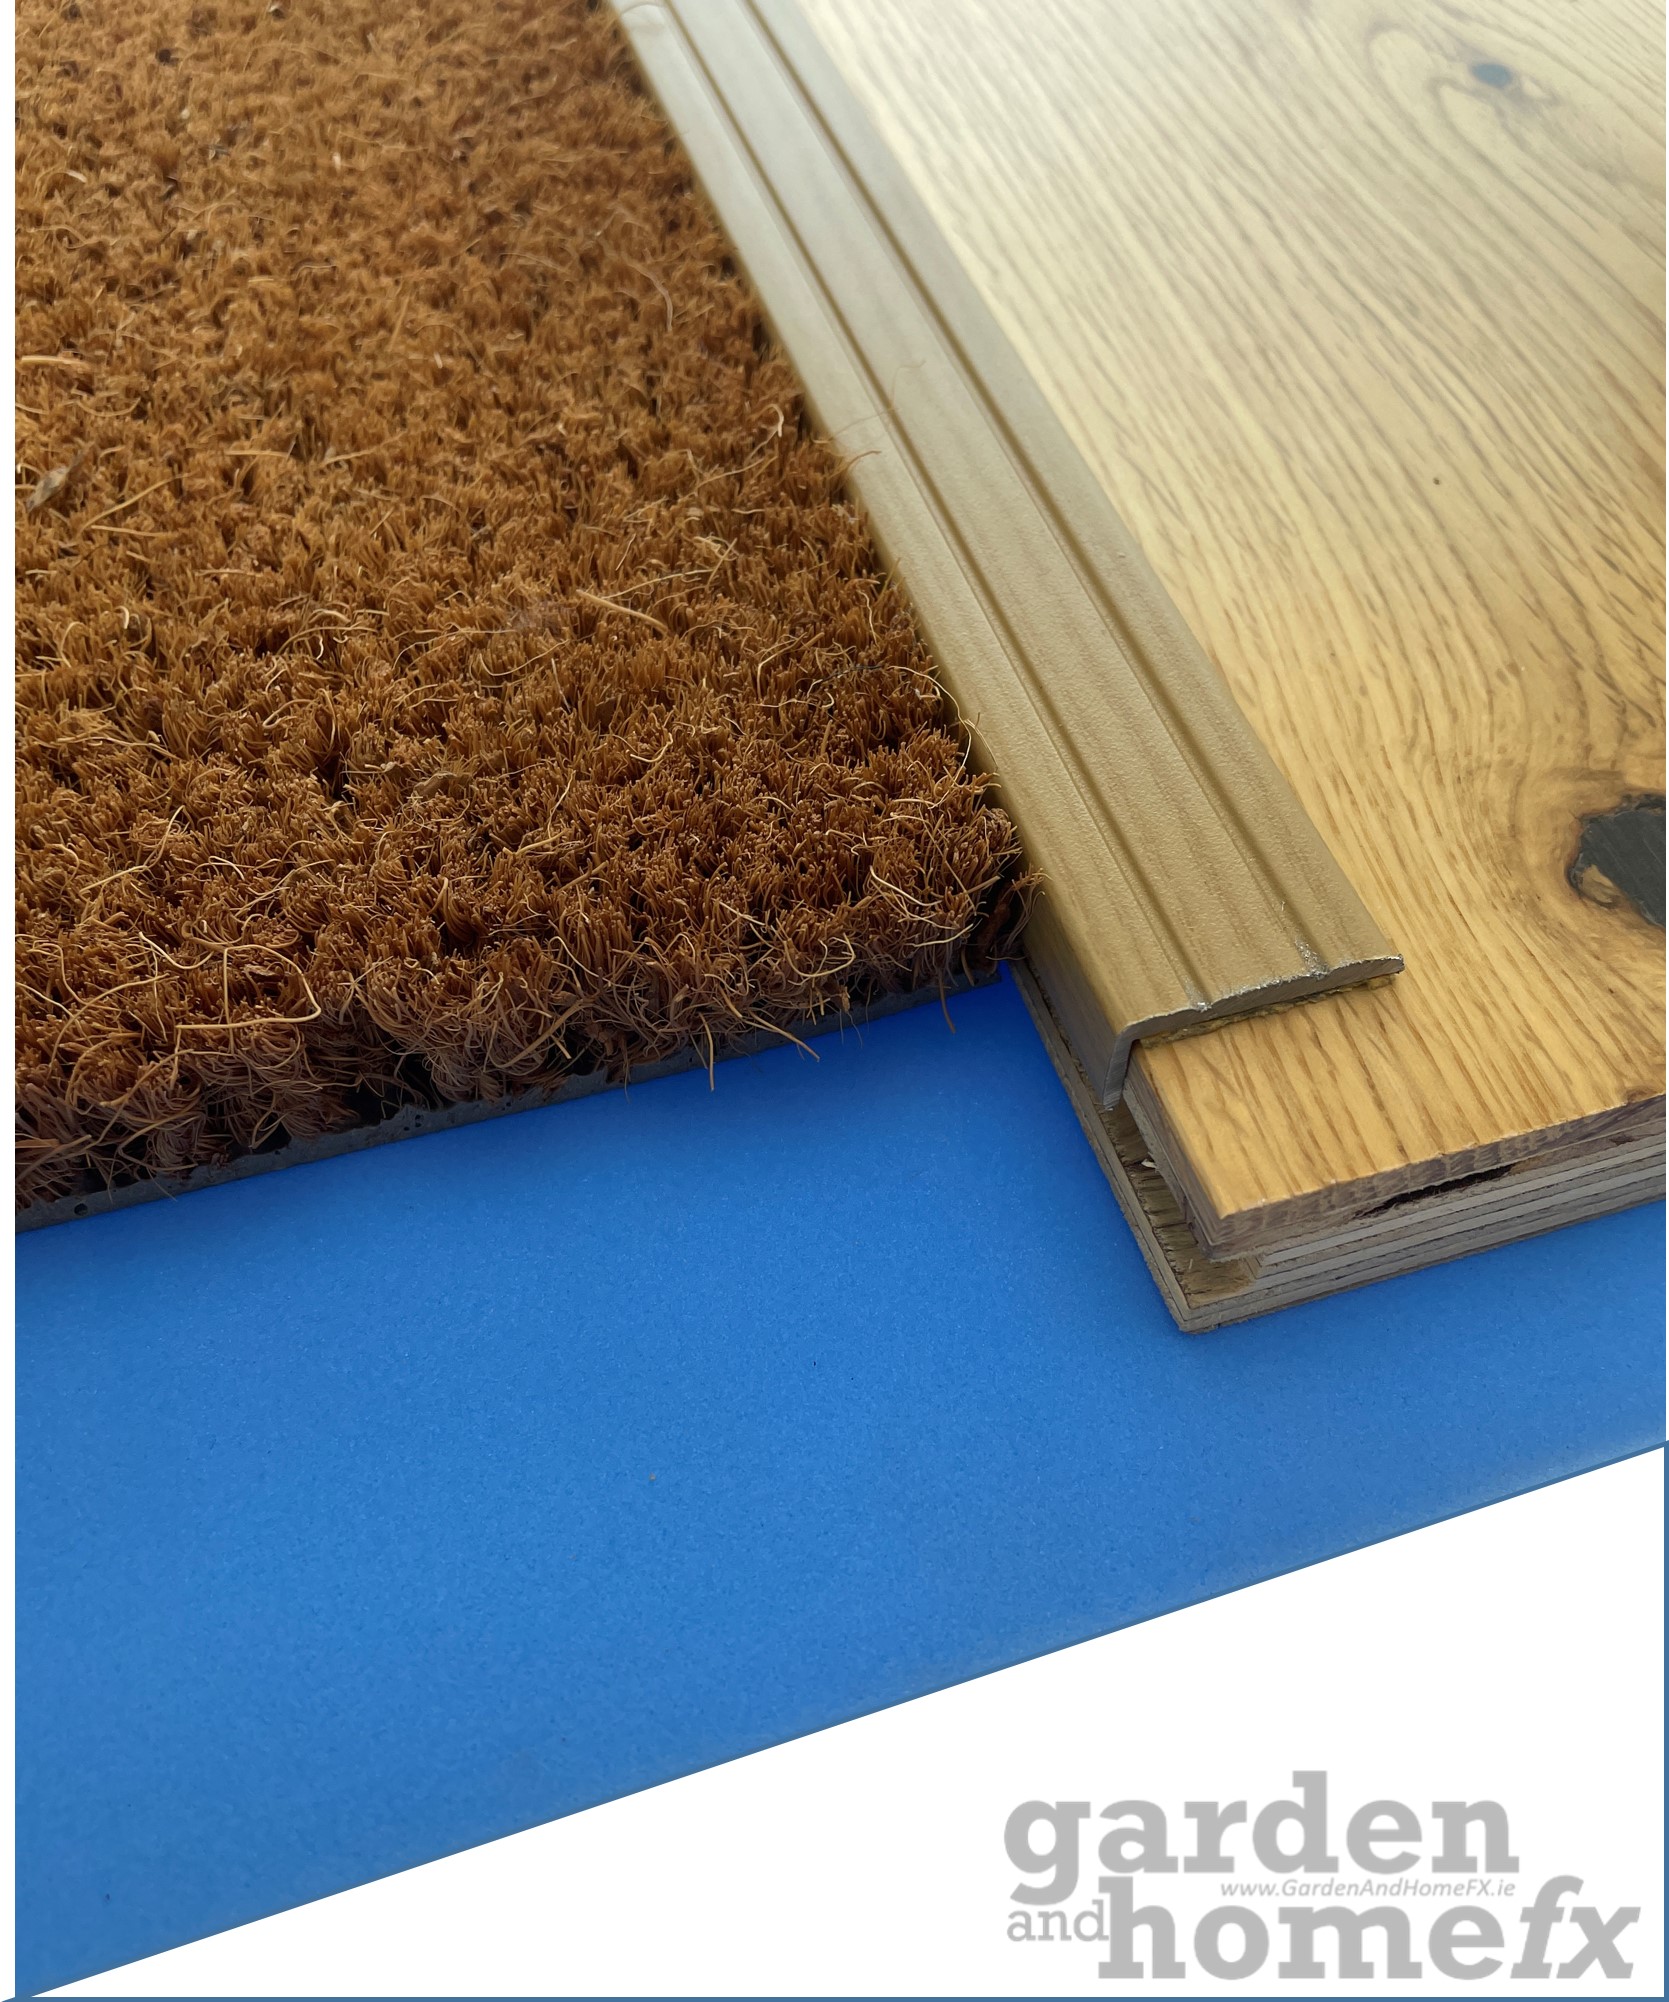 Matwell Edging for natural coir enterance matting for recessed mat well. supplied in Ireland